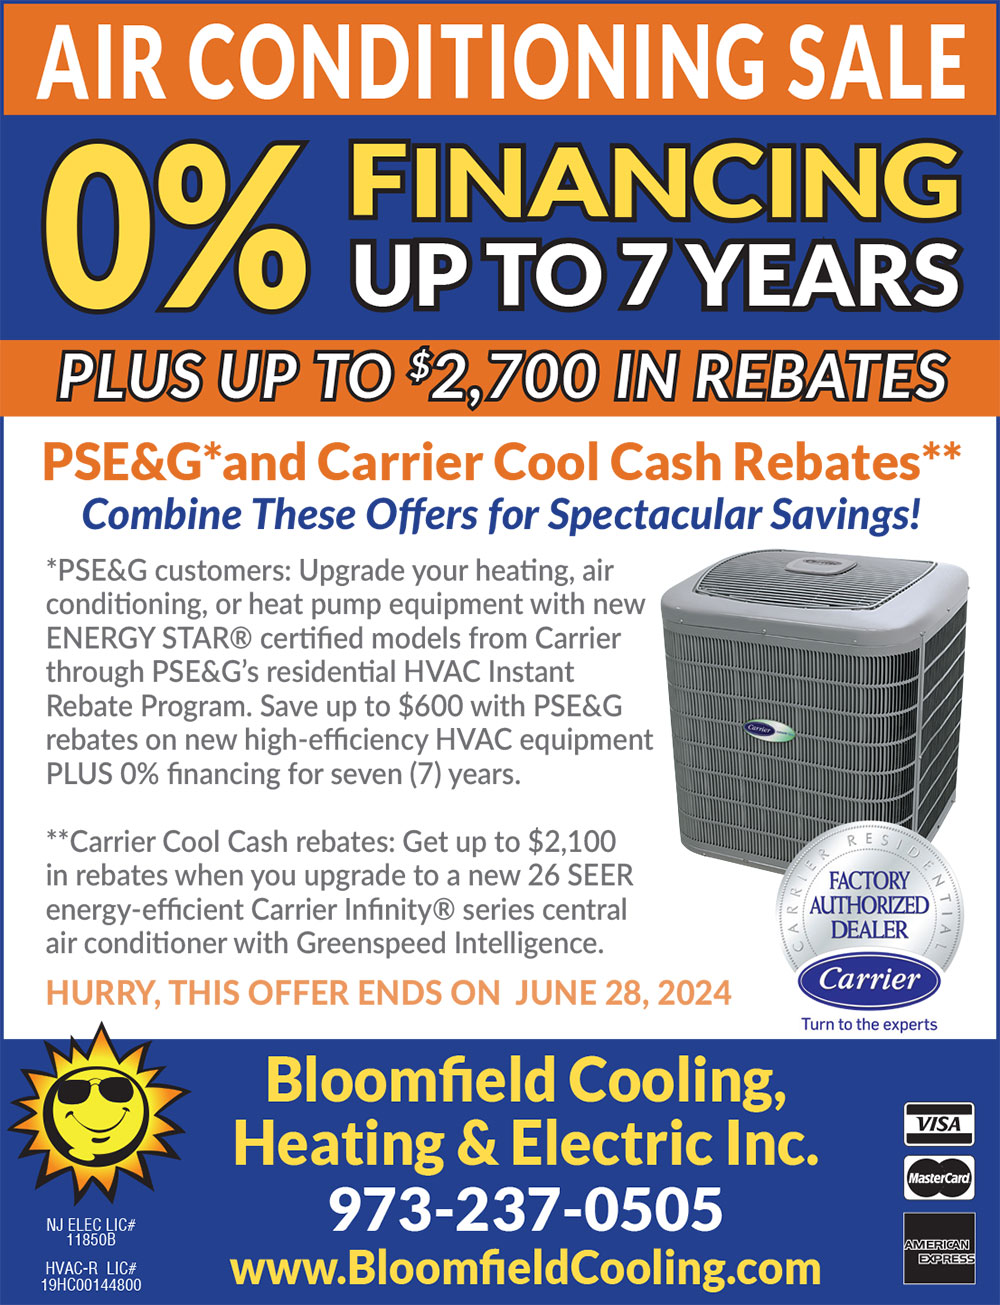 Bloomfield Cooling, Heating & Electric - Air Conditioning Sale 2024